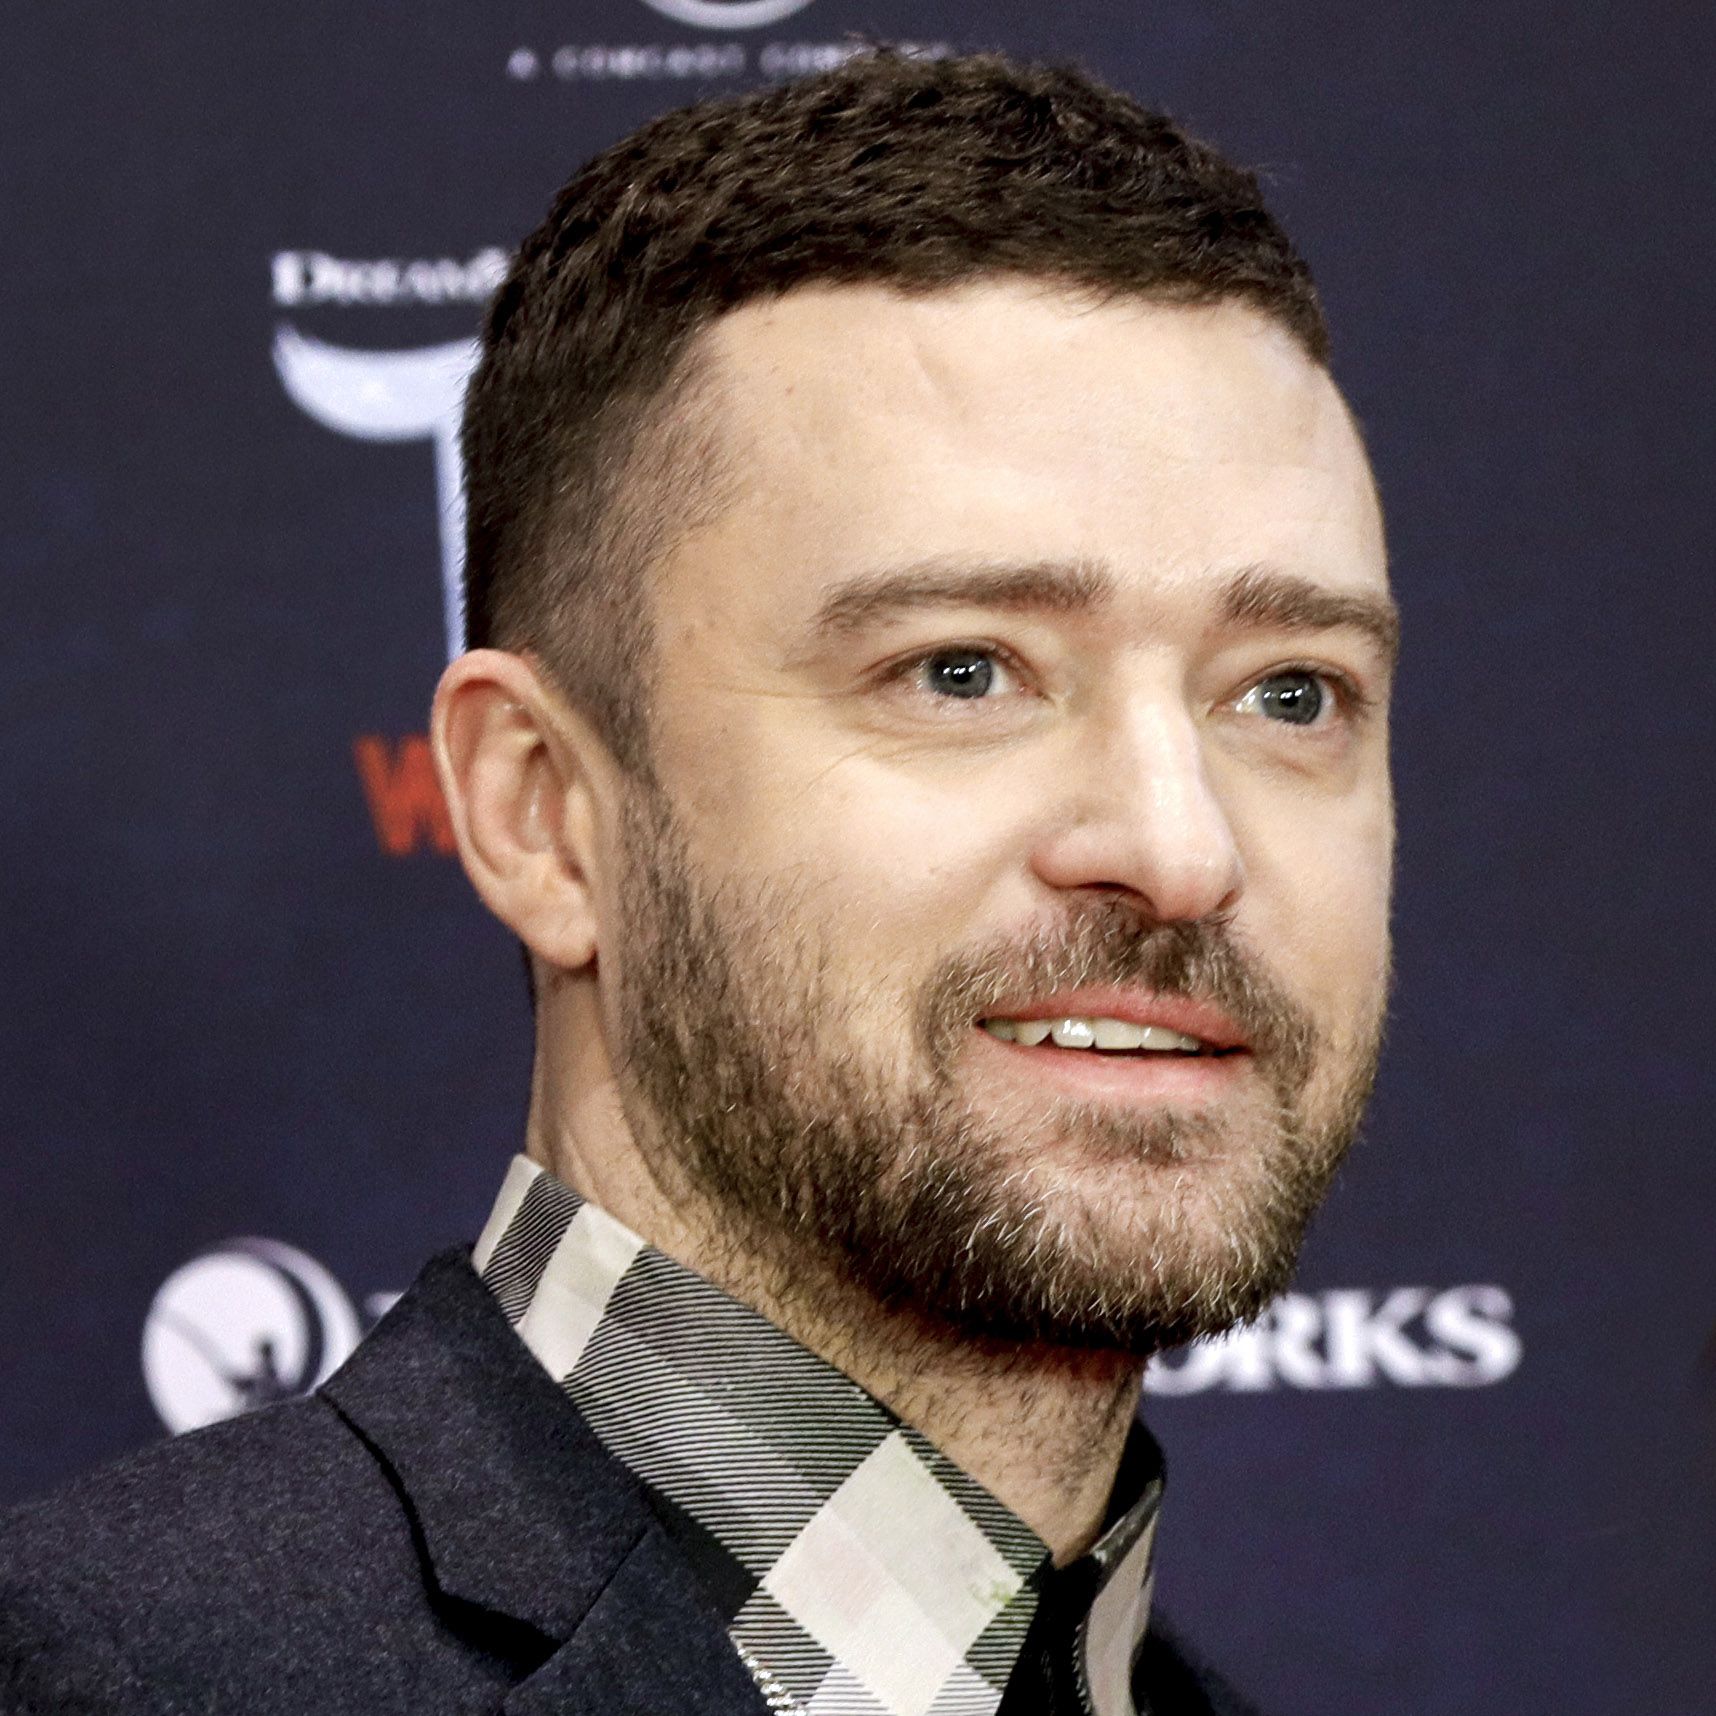 Justin Timberlake New Album Release Date, Who is Justin Timberlake?